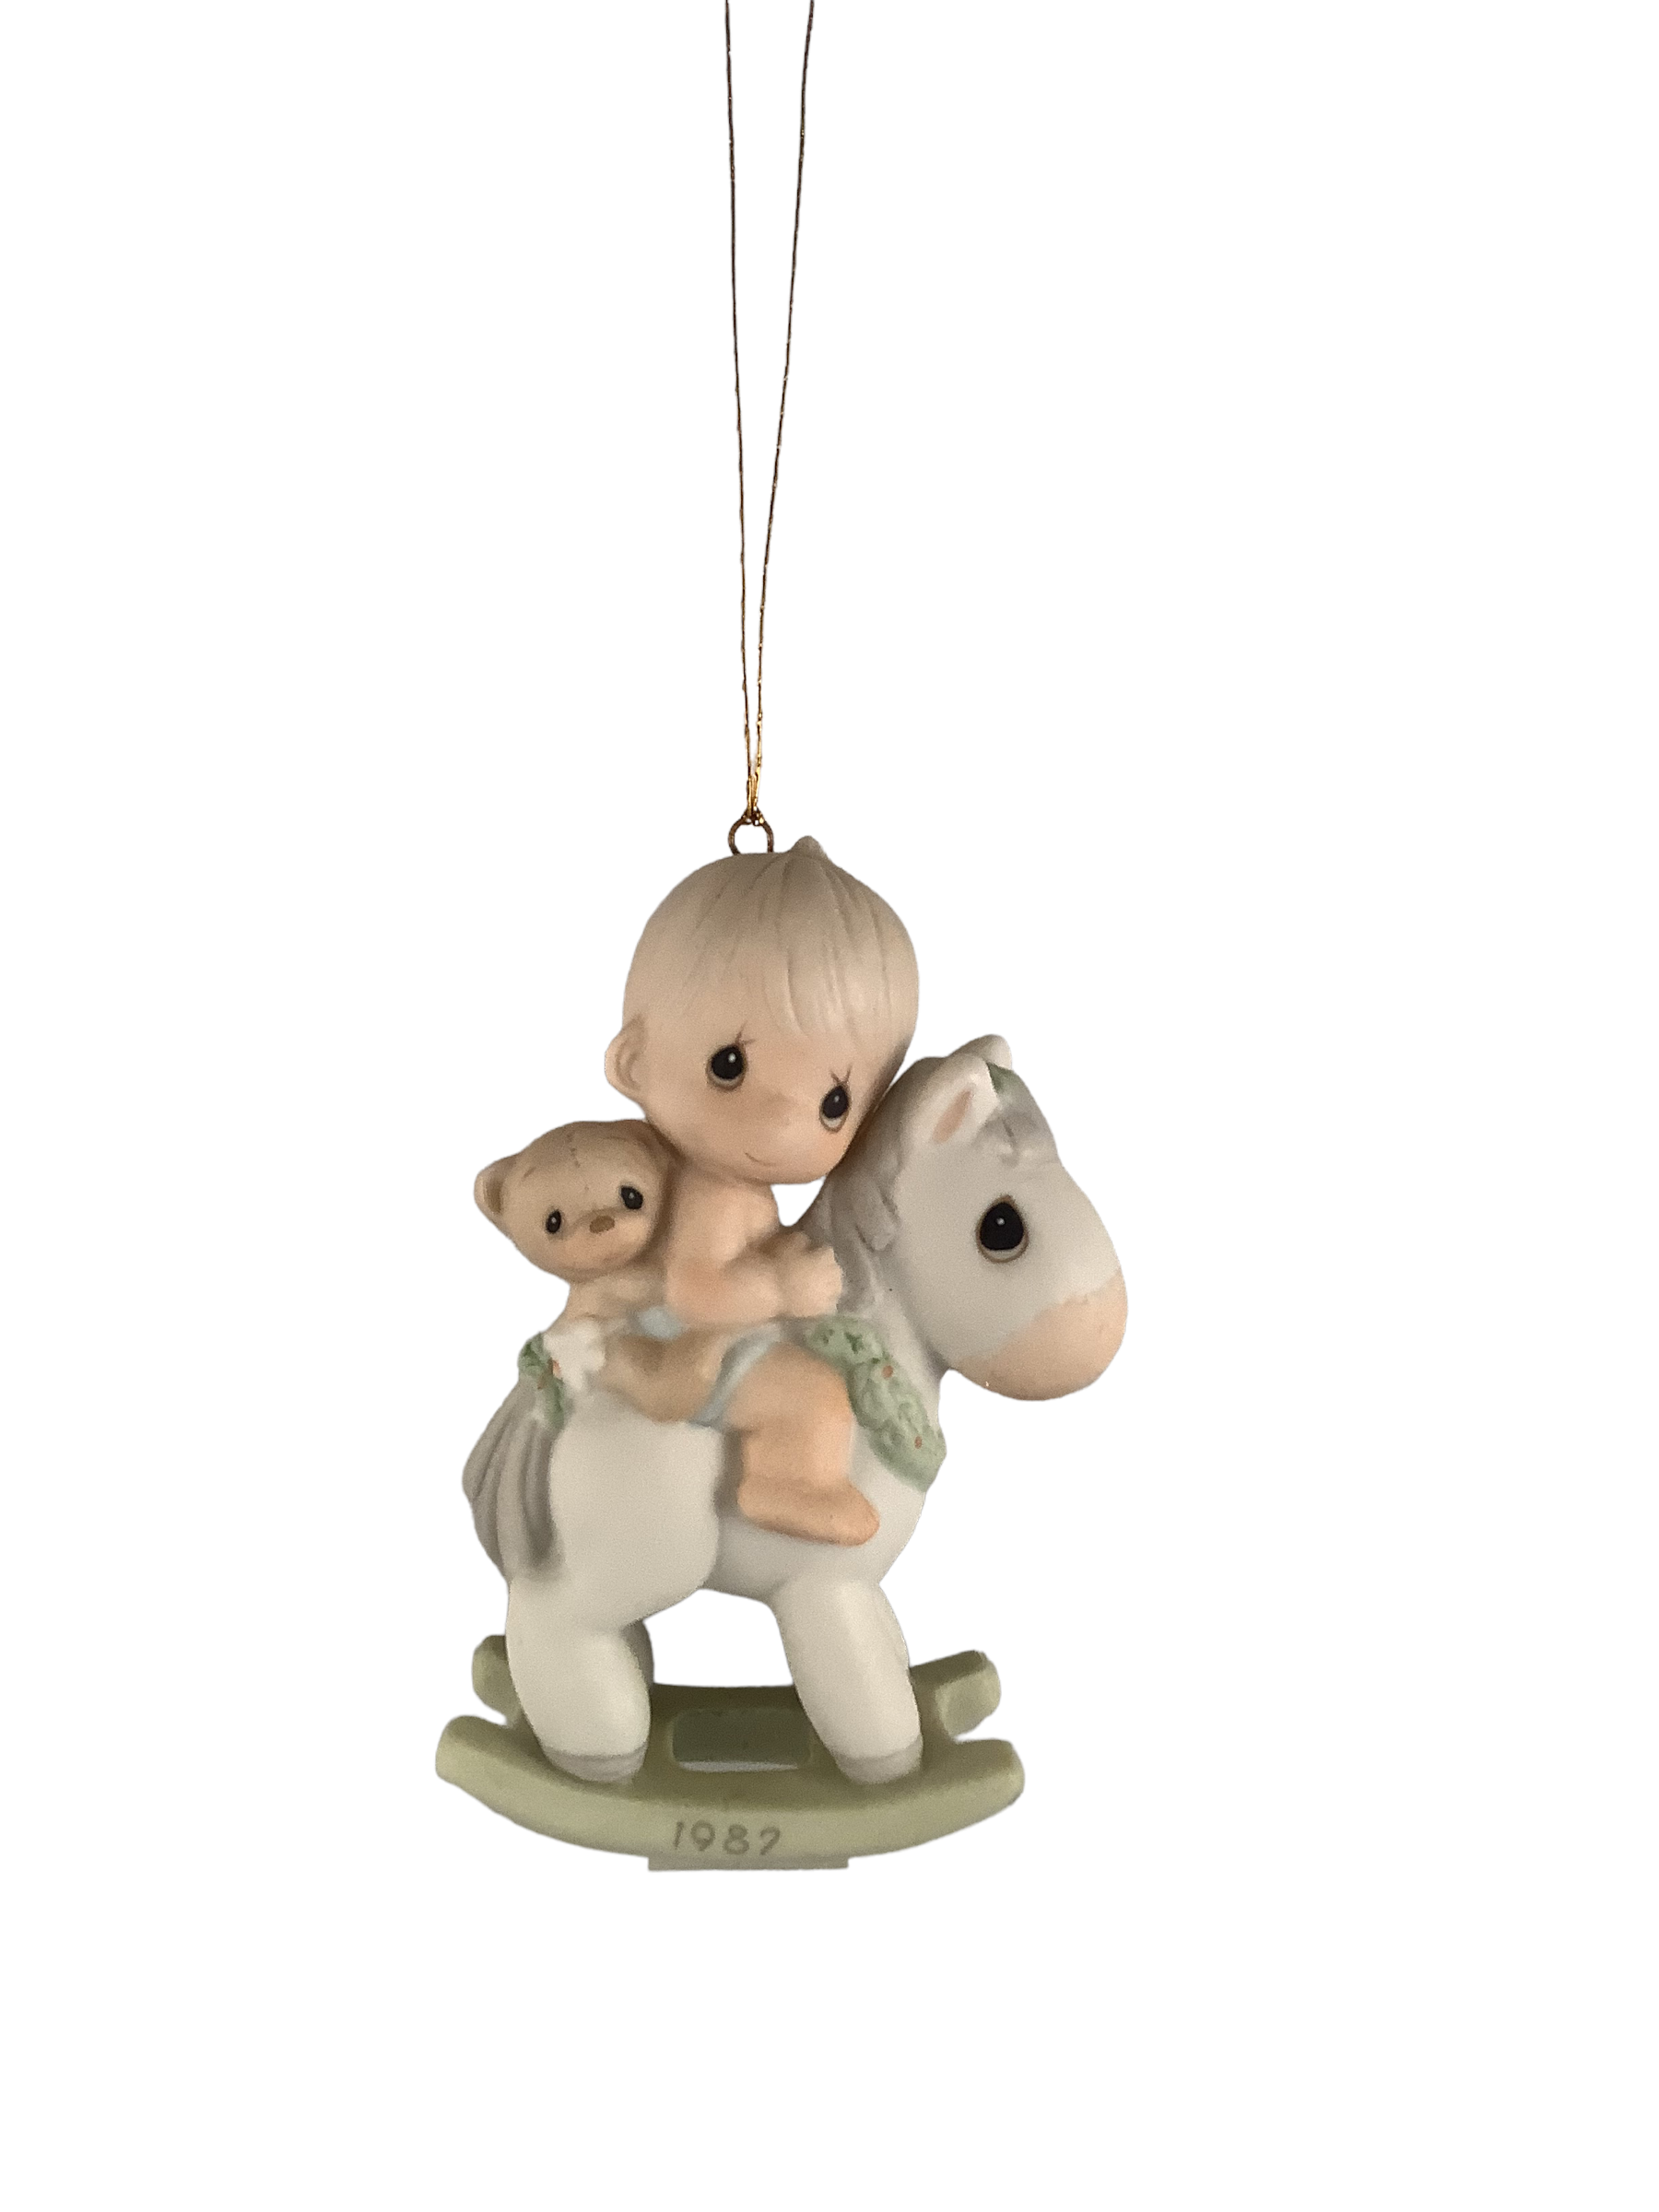 Baby's First Christmas 1987 (Boy) - Precious Moment Ornament